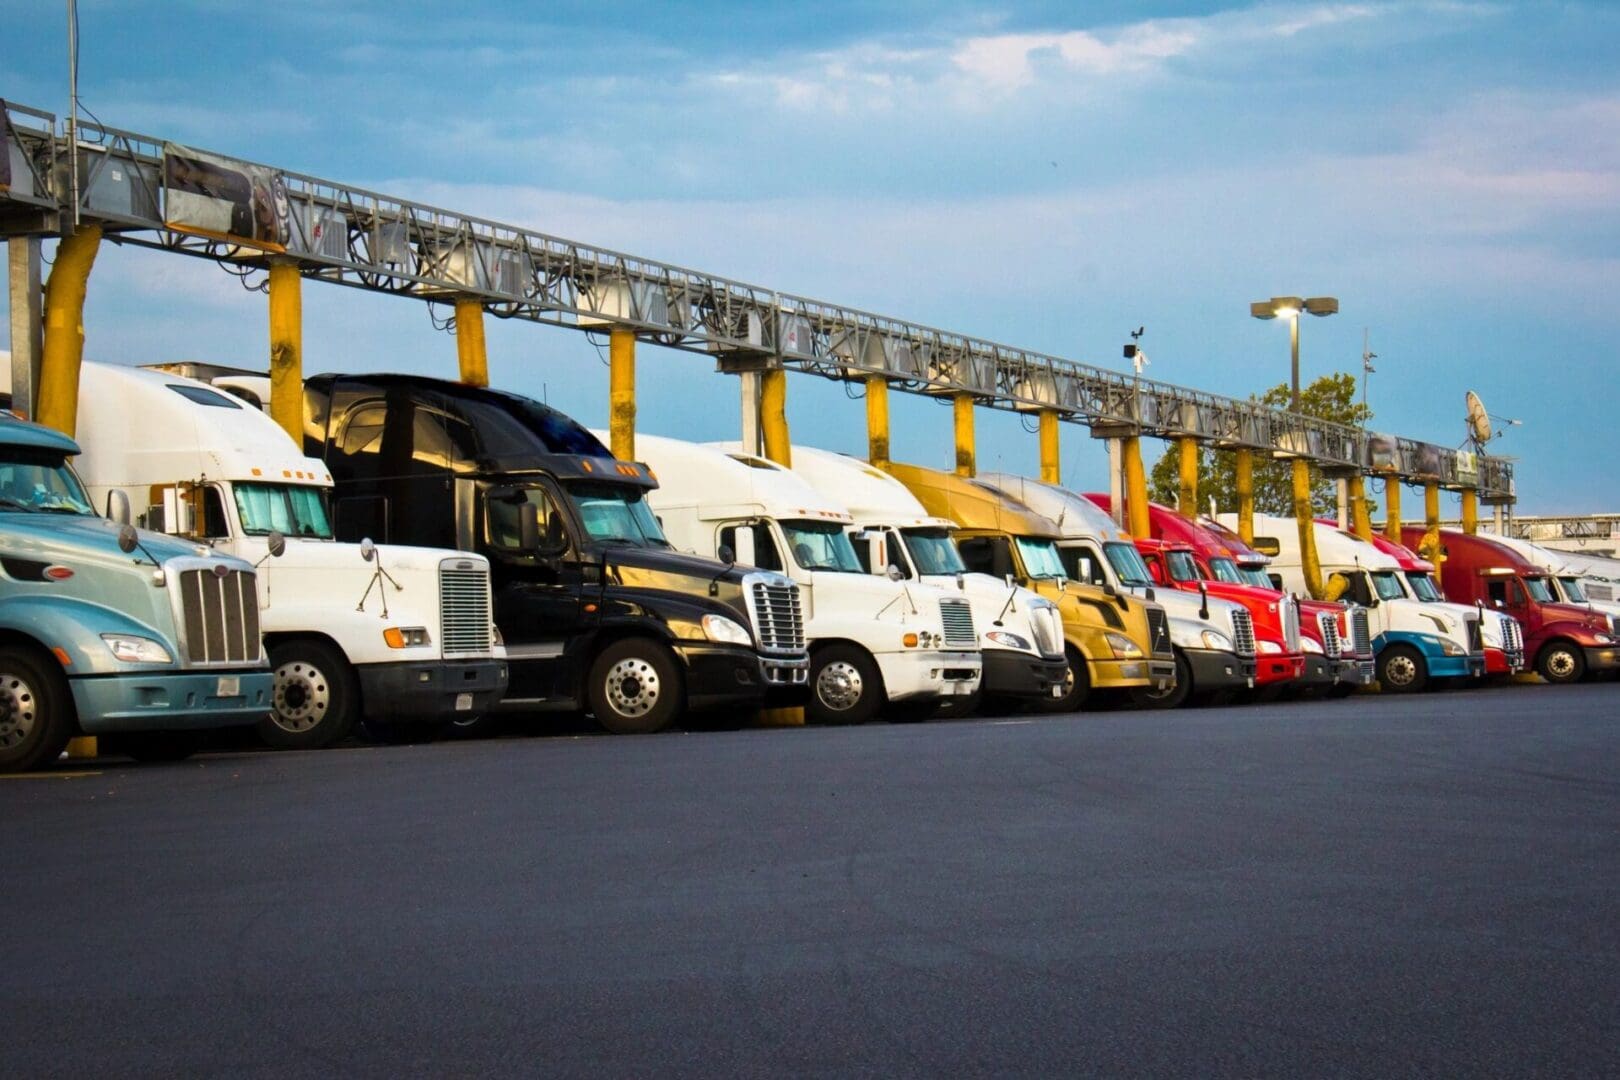 A line of trucks parked in front of a yellow fence.